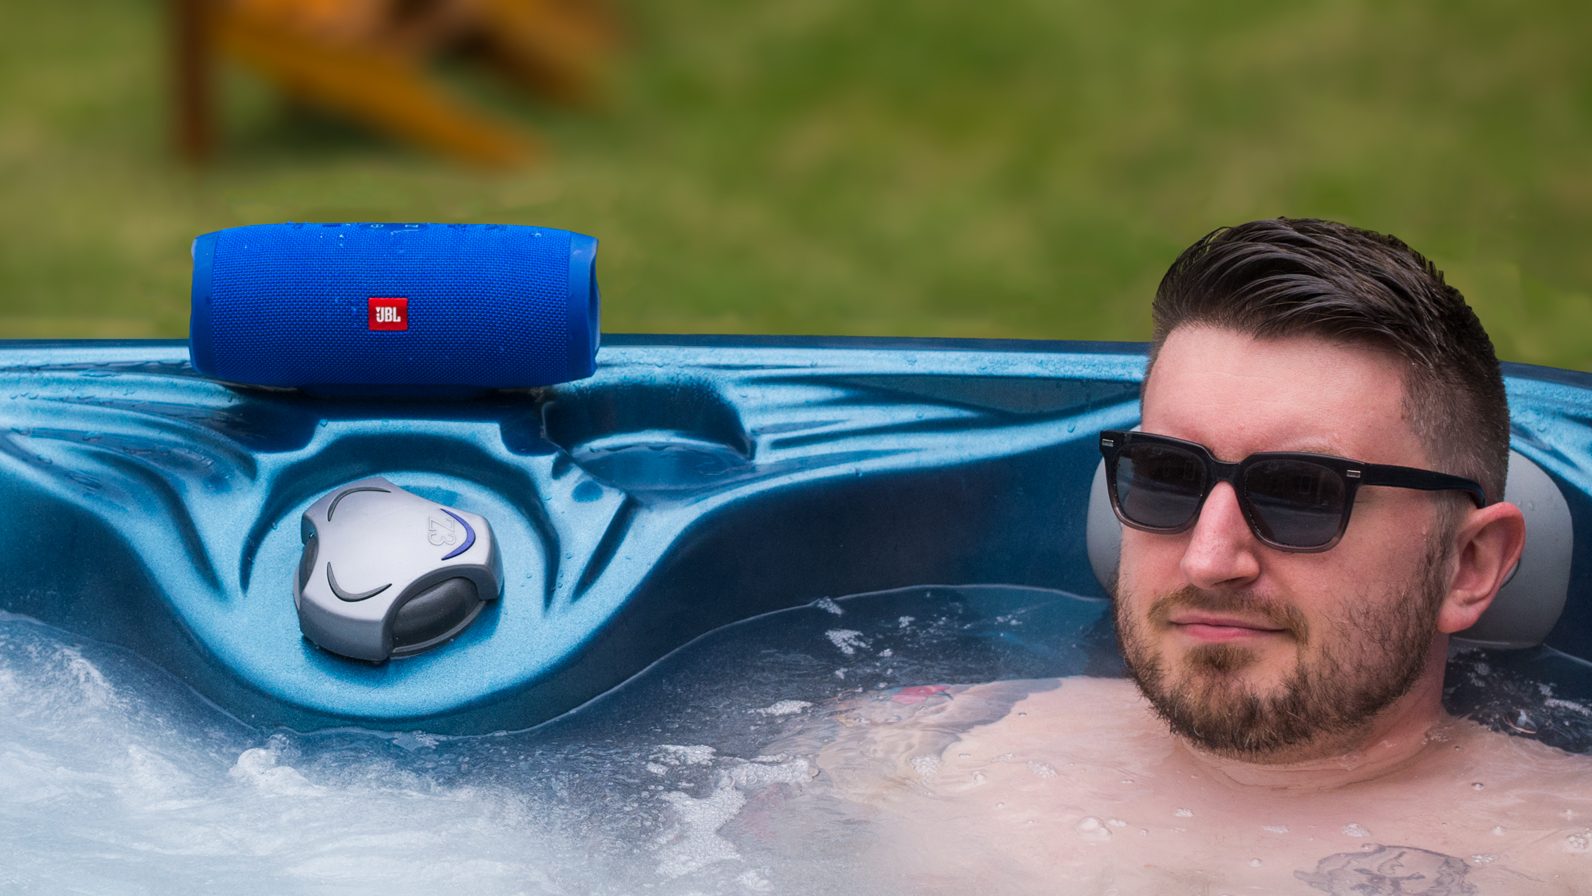 A photo of the JBL Charge 3 in use near a hot tub.